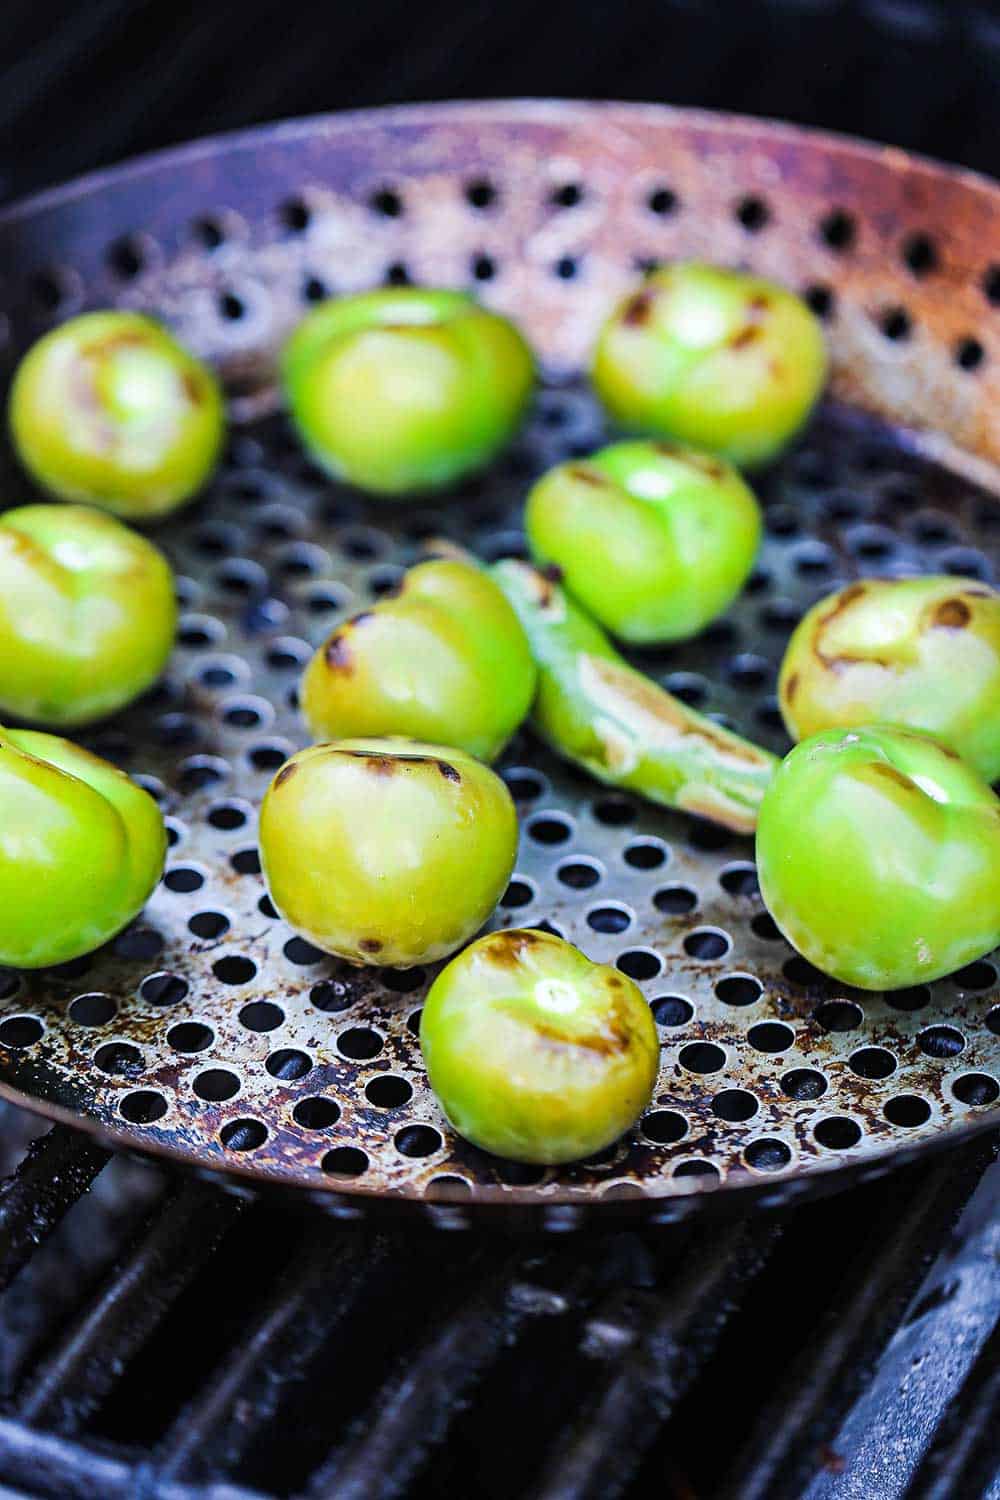 A circular grill pan filled with tomatillos and a serrano pepper that have been roasted and lightly charred.